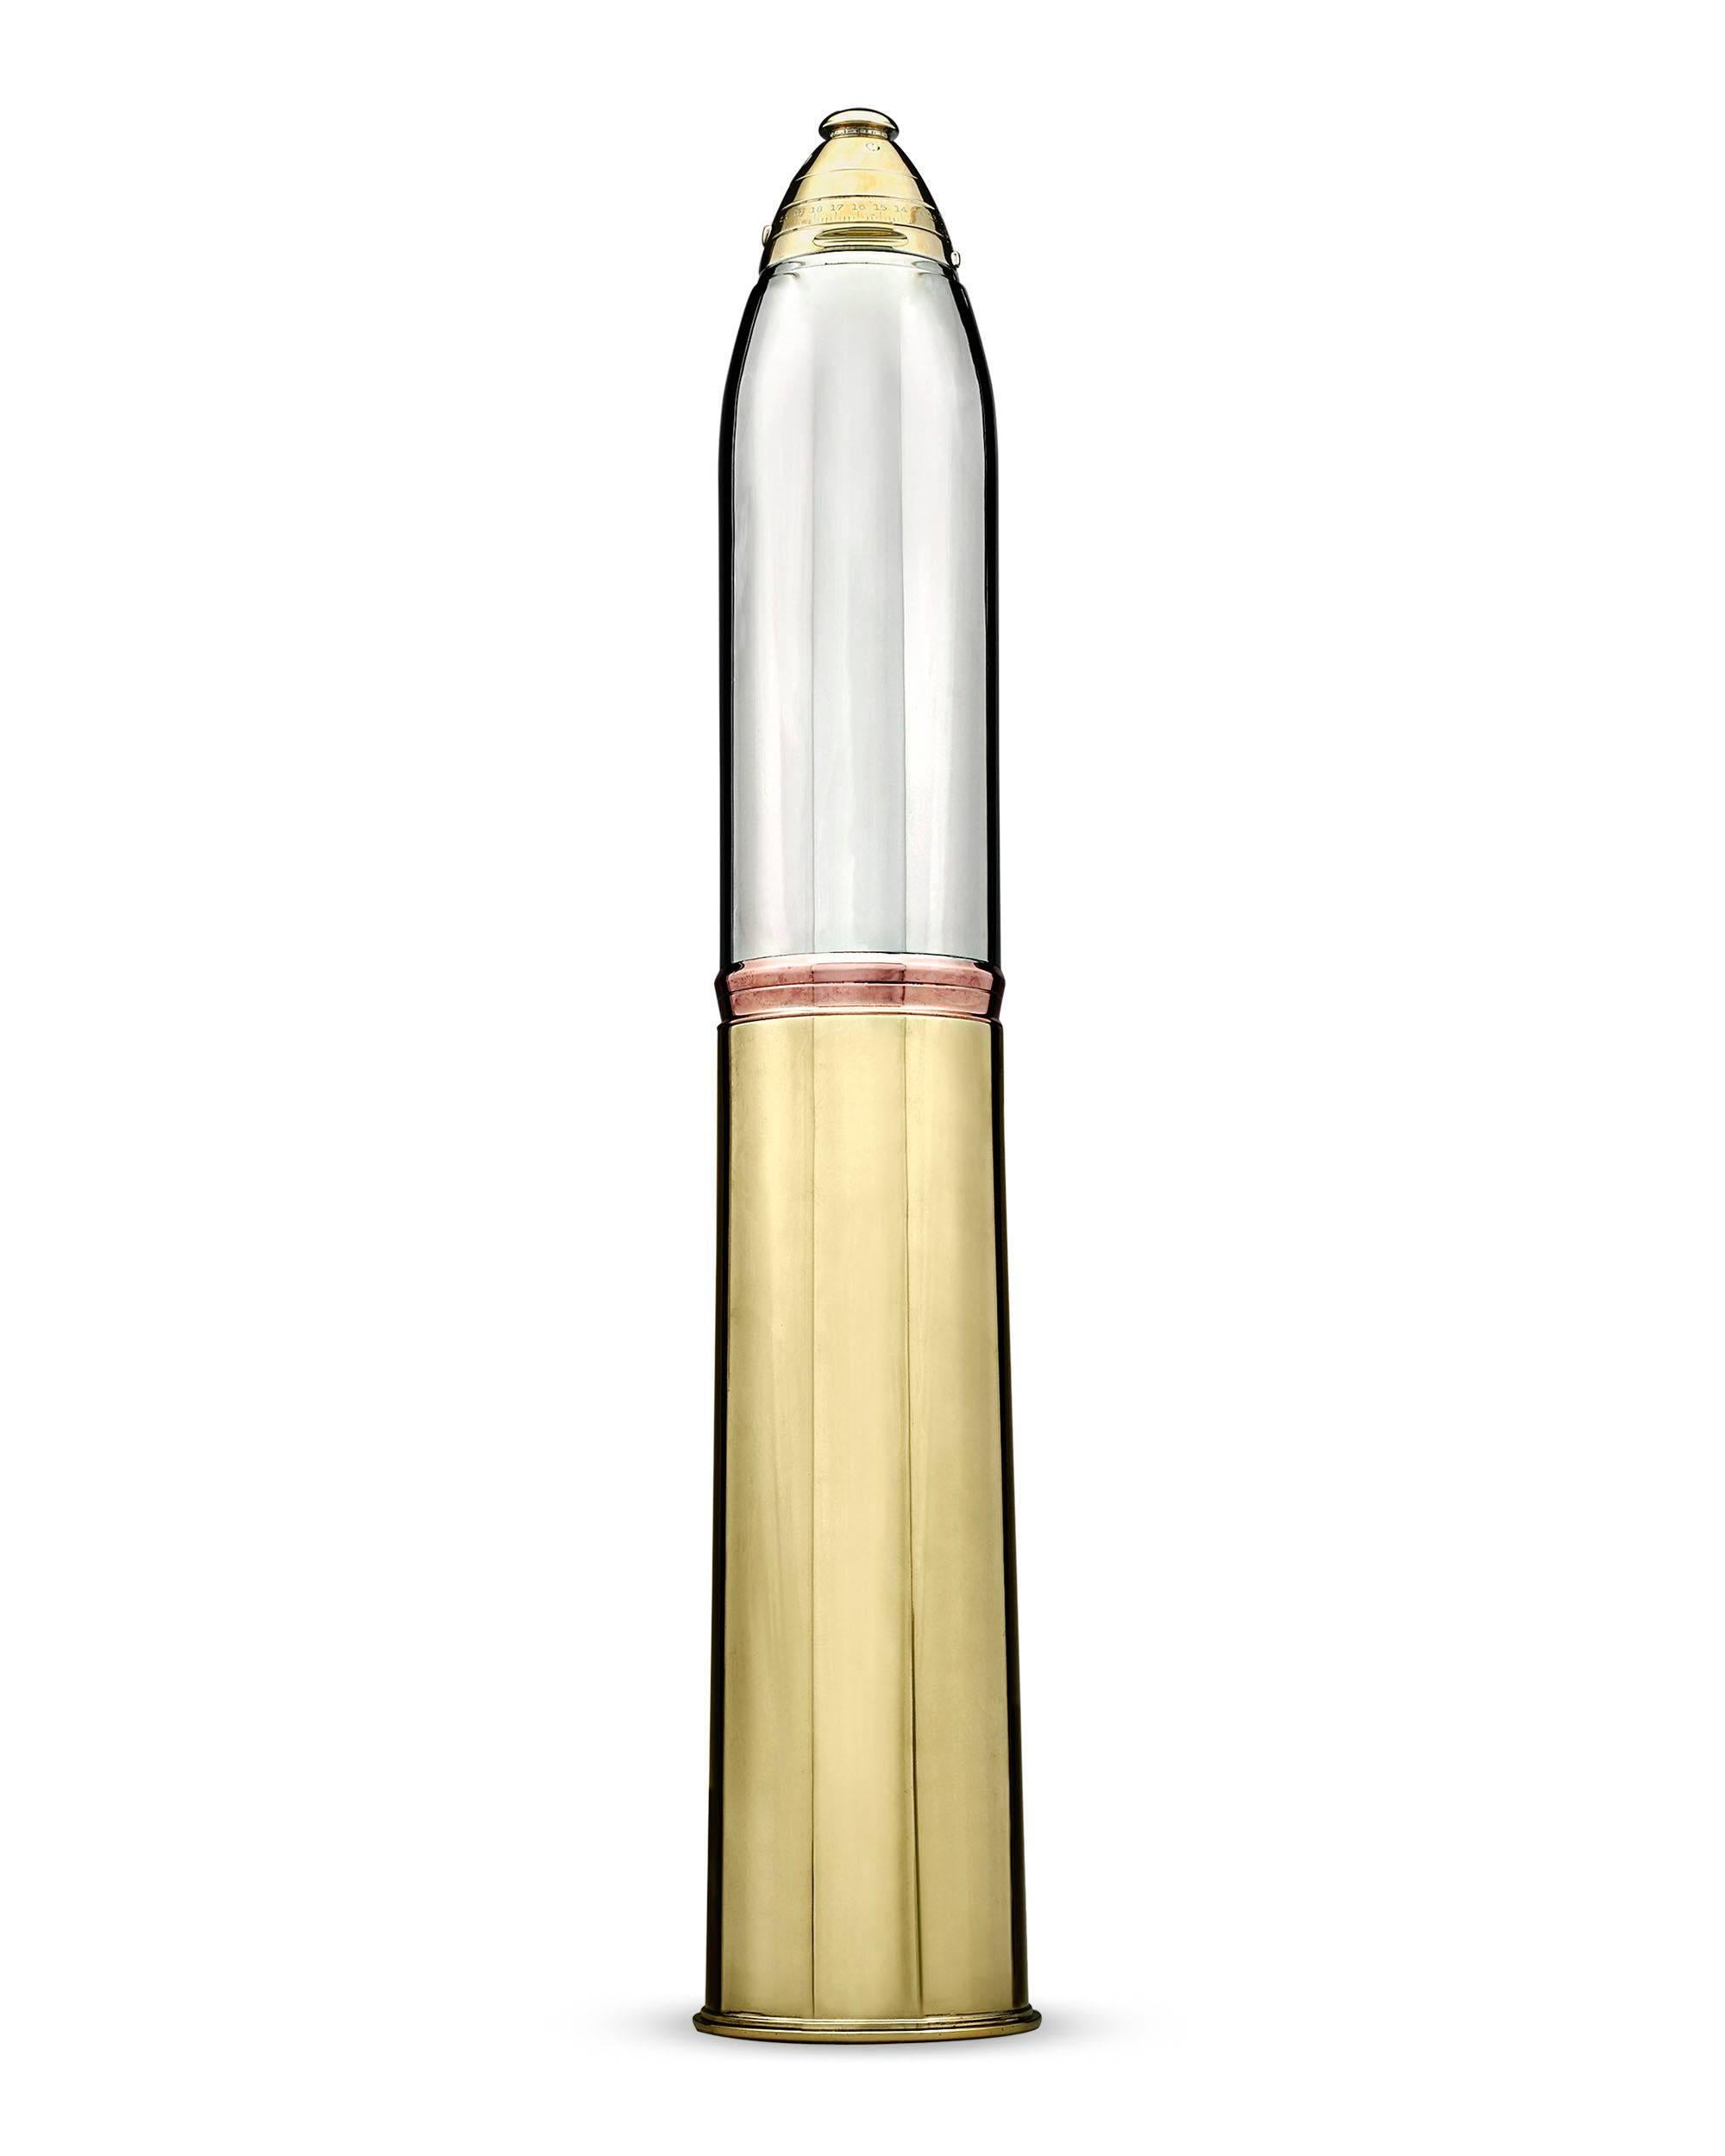 This incredibly rare artillery shell cocktail Shaker, crafted by the Gorham Silver Company, is one of the very few remaining of its kind with all of its original parts. Sleek and aerodynamic, the Shaker is one of the tallest ever produced and, as a